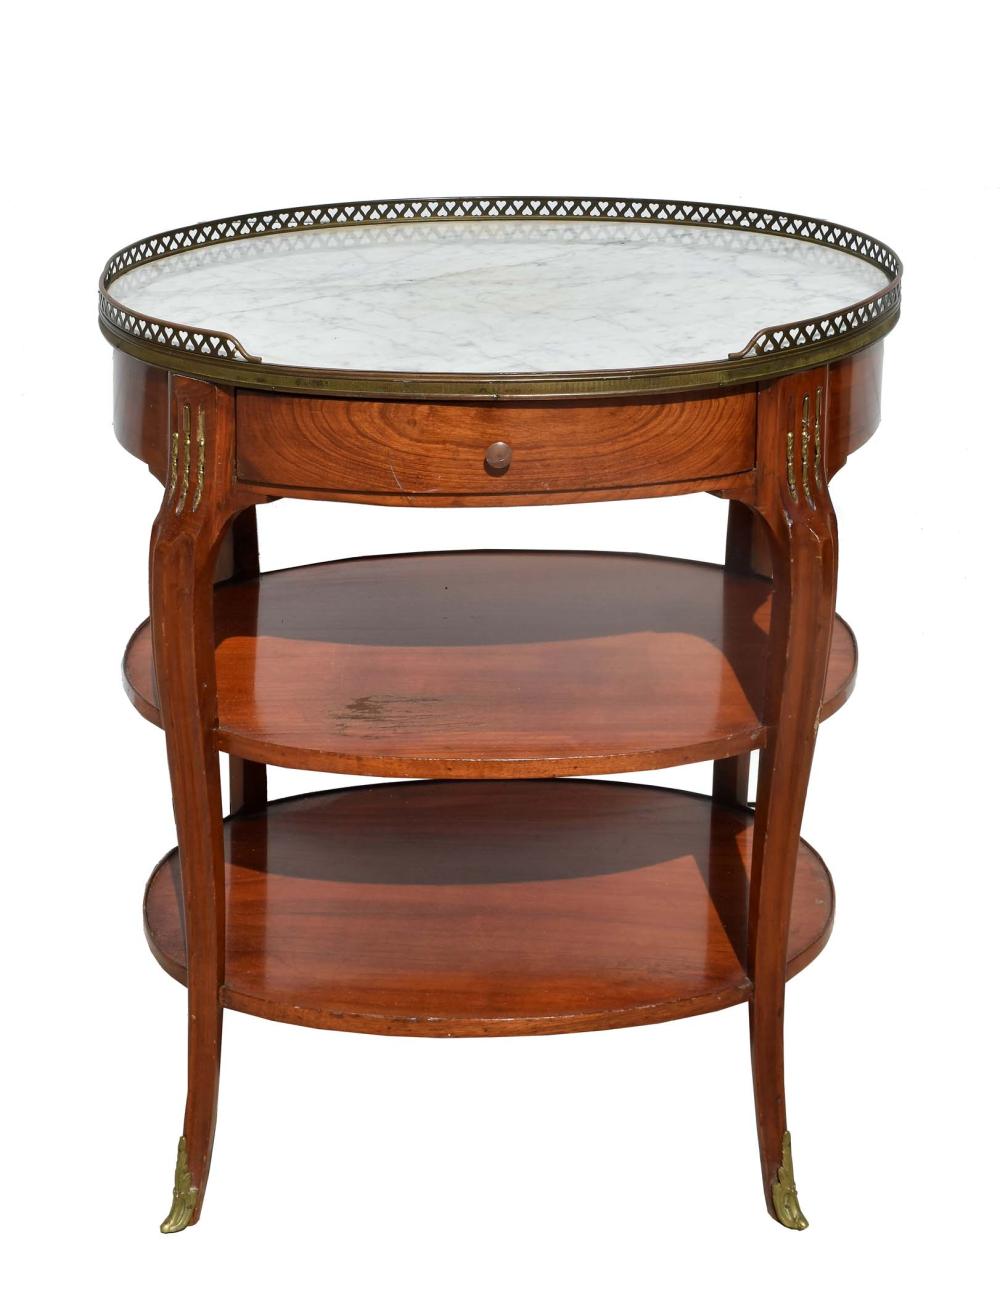 FRENCH MARBLE TOP MAHOGANY TABLE EN